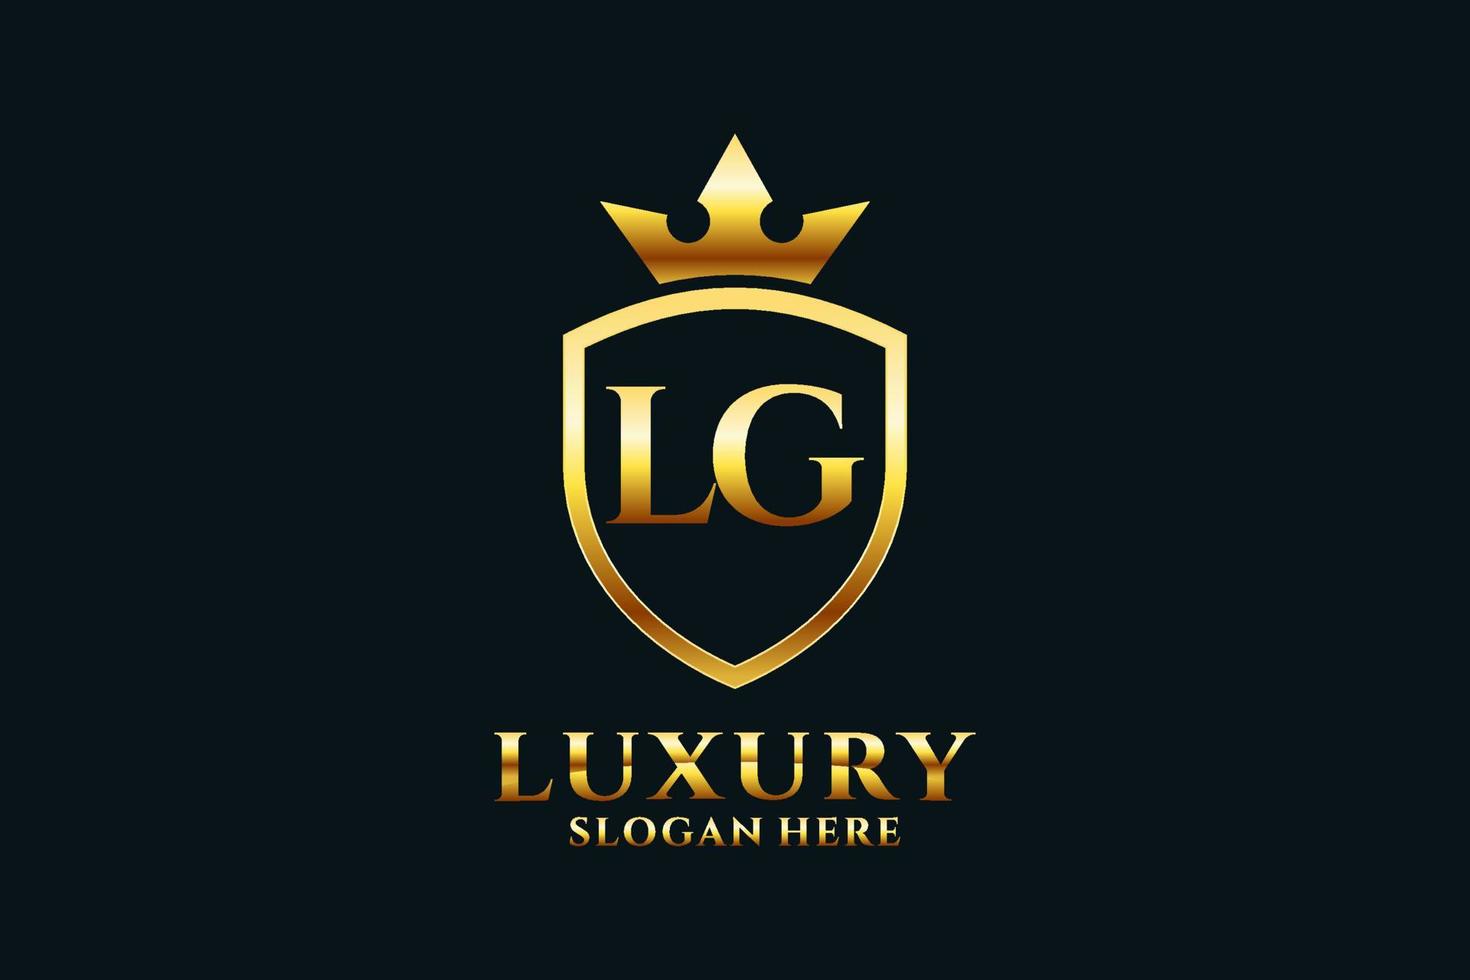 initial LG elegant luxury monogram logo or badge template with scrolls and royal crown - perfect for luxurious branding projects vector